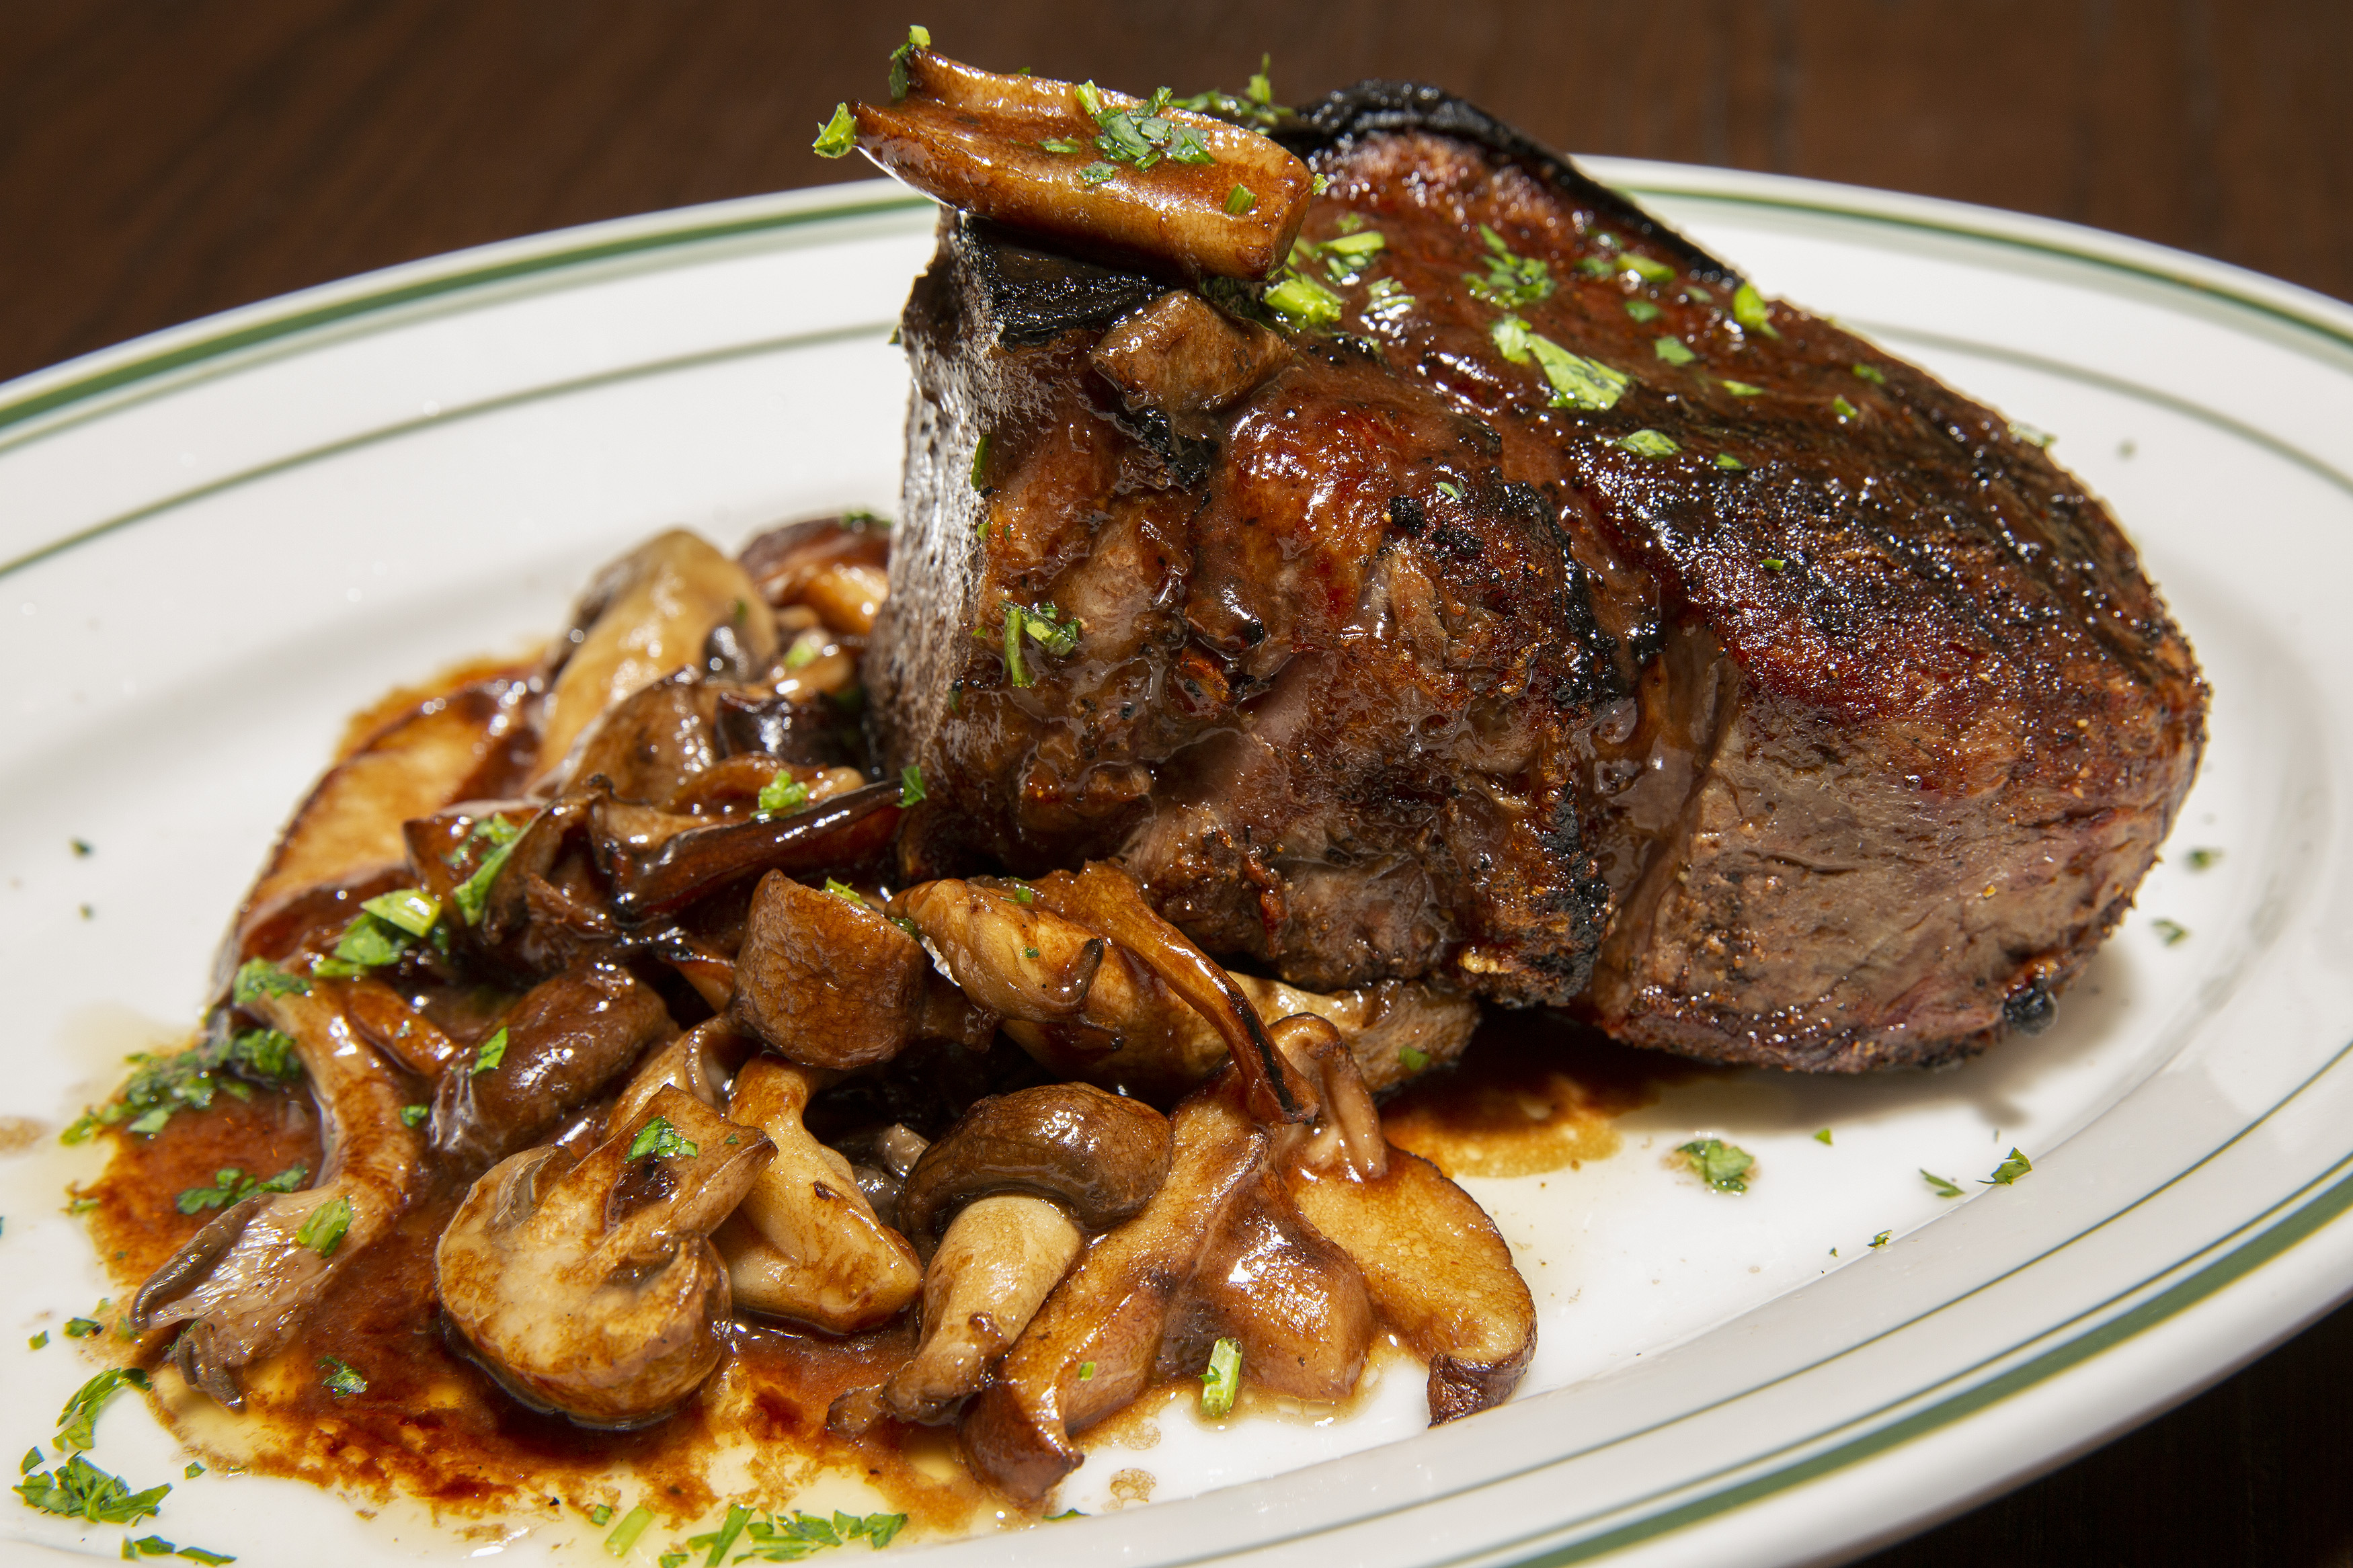 A juicy-looking filet mignon beside a pile of browned mushrooms on a white plate.